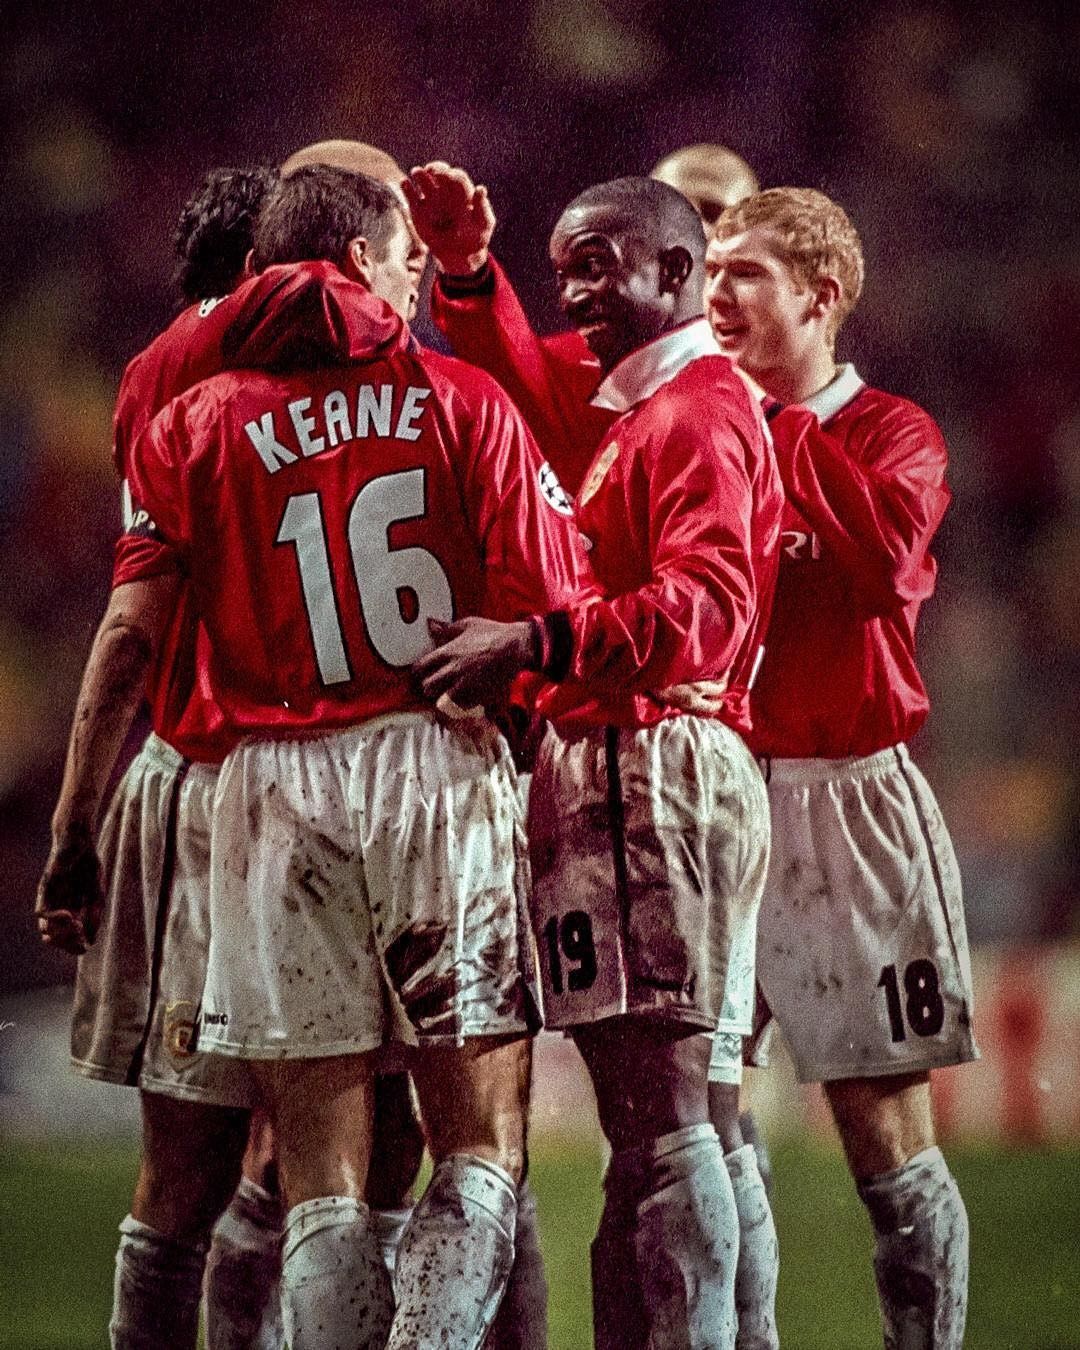 ❤️ Manchester United 6 Brondby In The 98 99 Preliminary Round European League. Manchester United, Manchester United Football Club, Manchester United Football